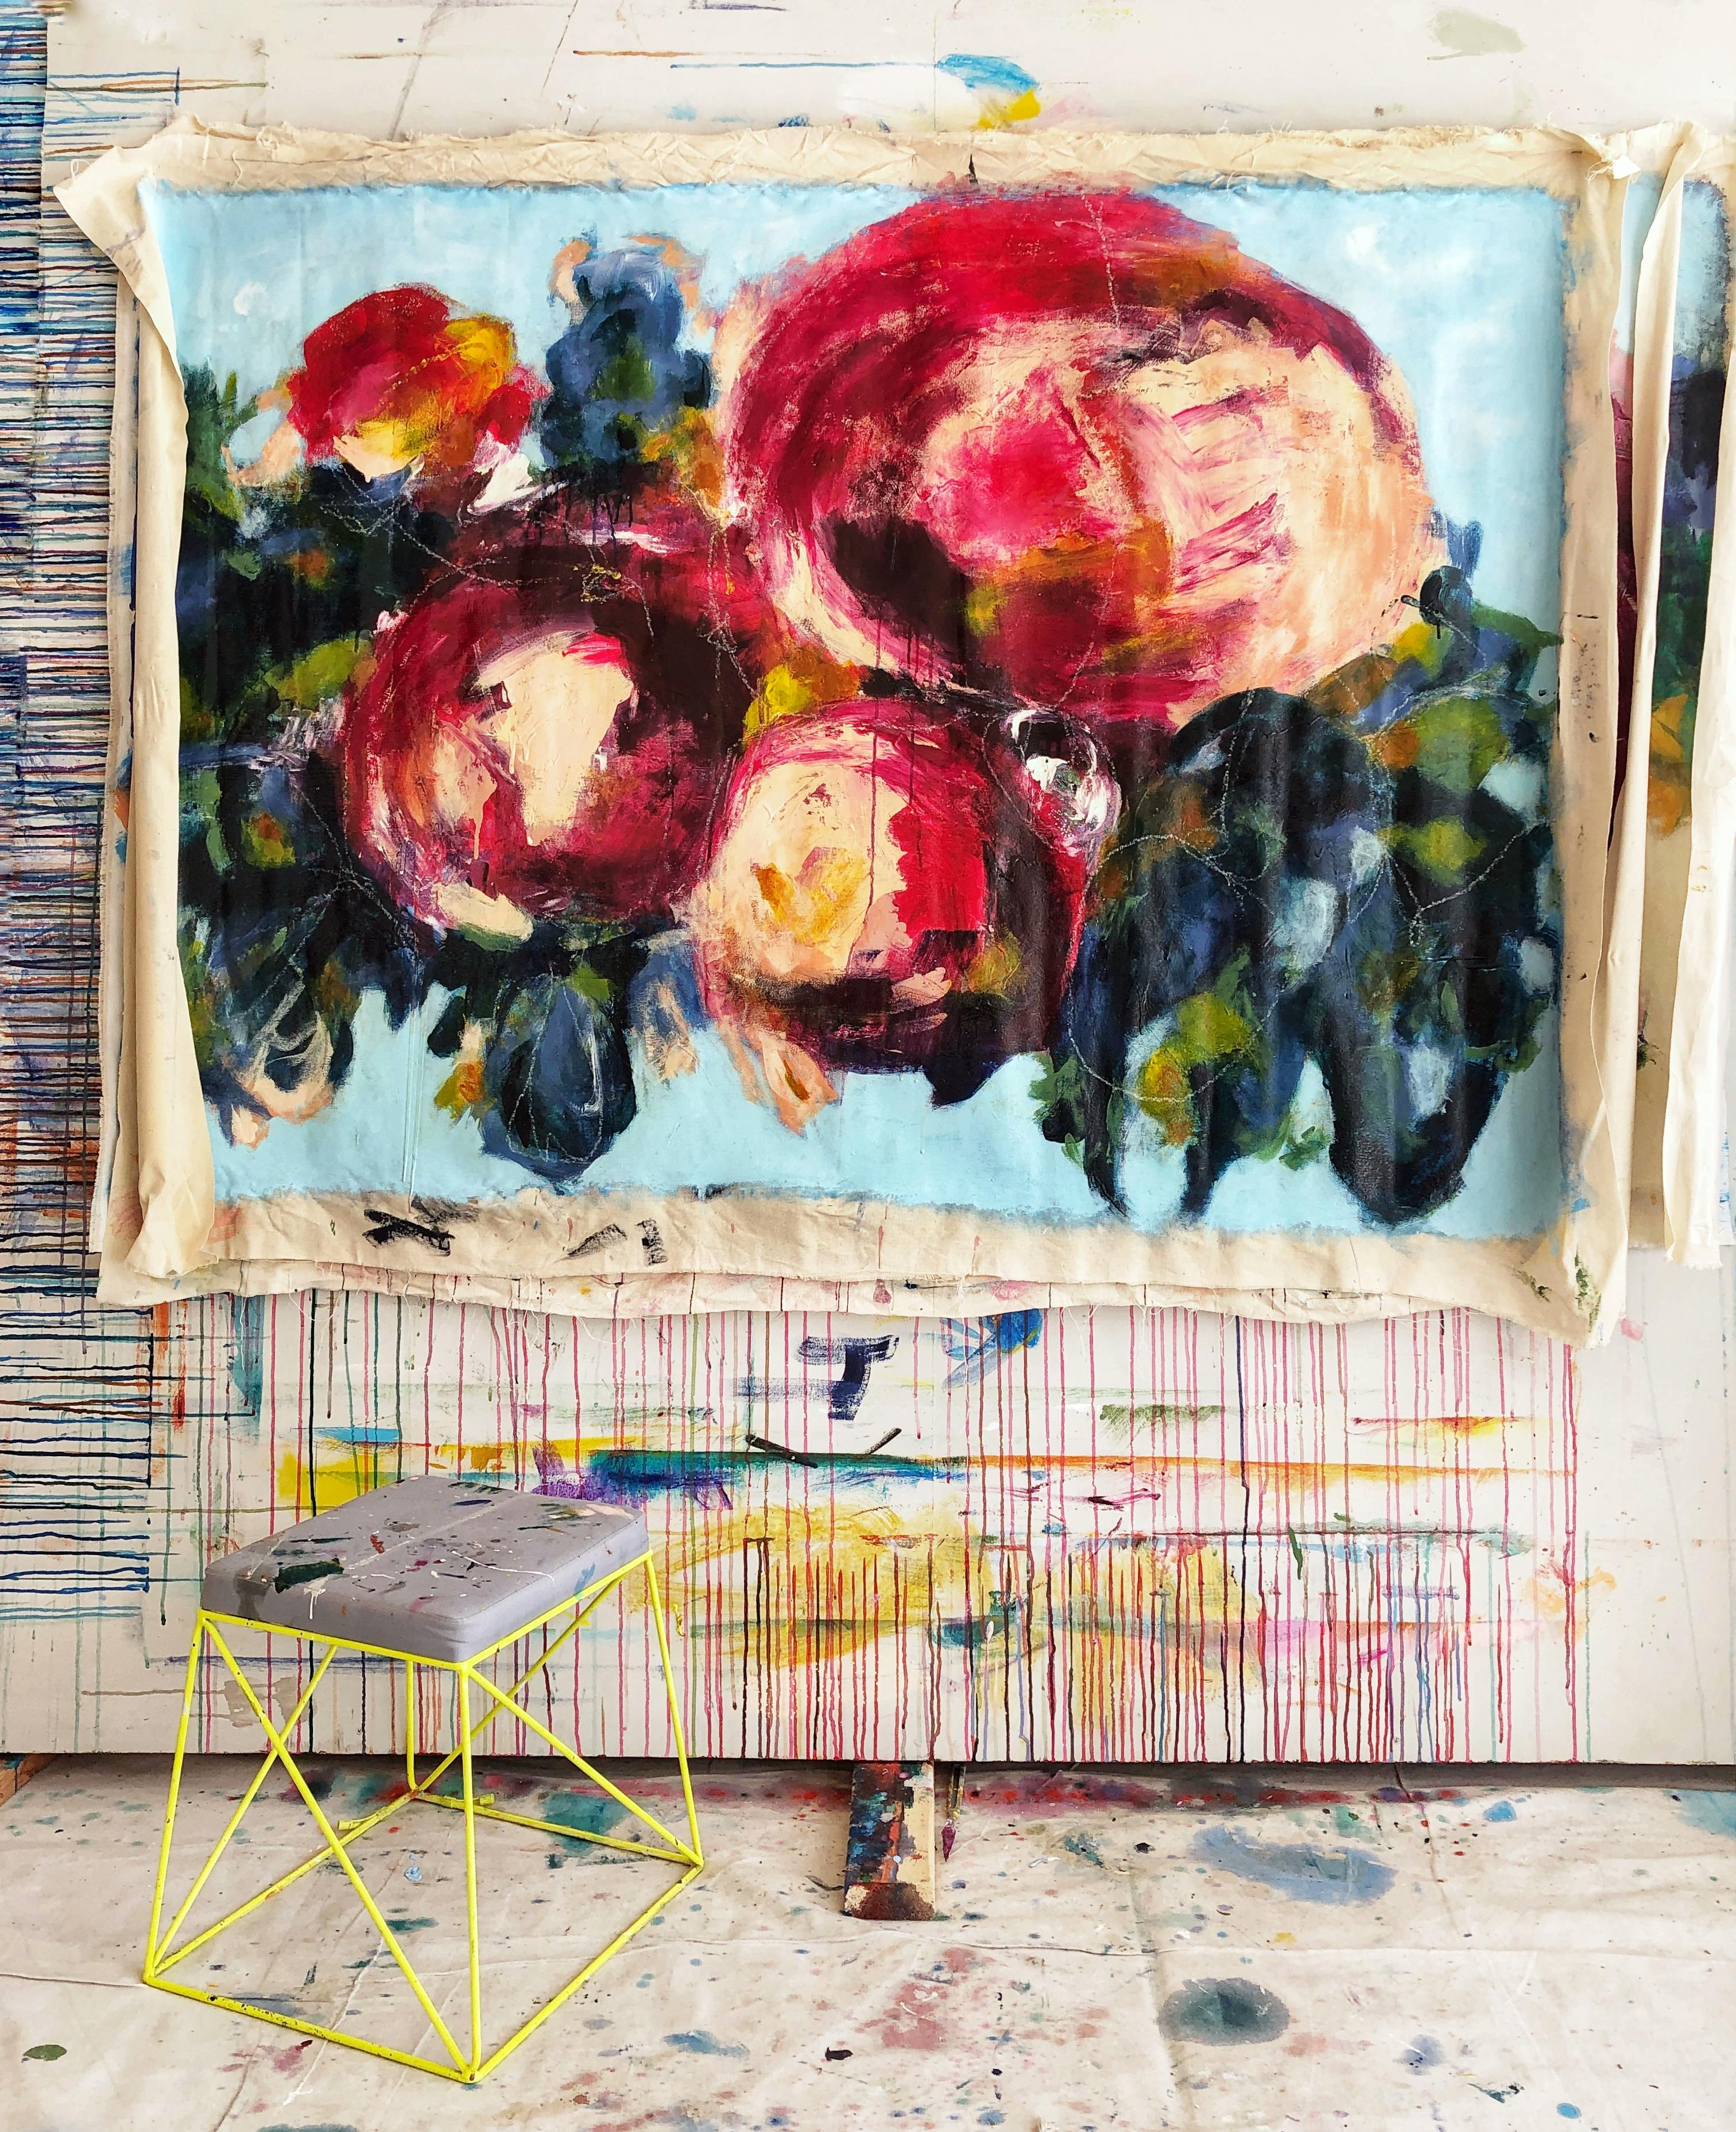 An abstract floral painting with drips by artist Elisa Gomez in her studio.